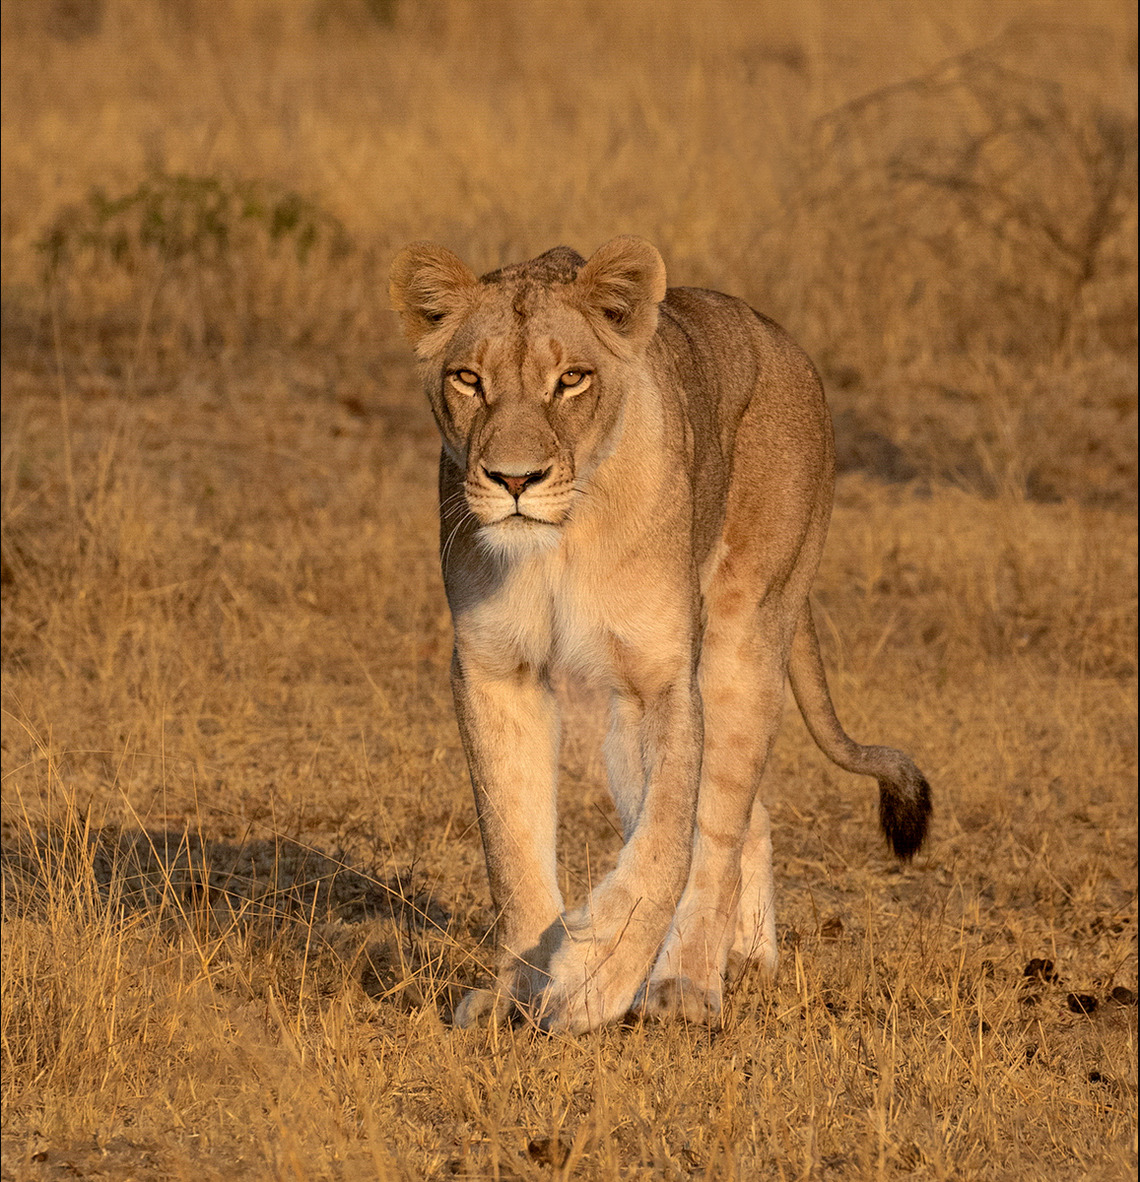 Early morning photo of a lioness walking casually towards the camera